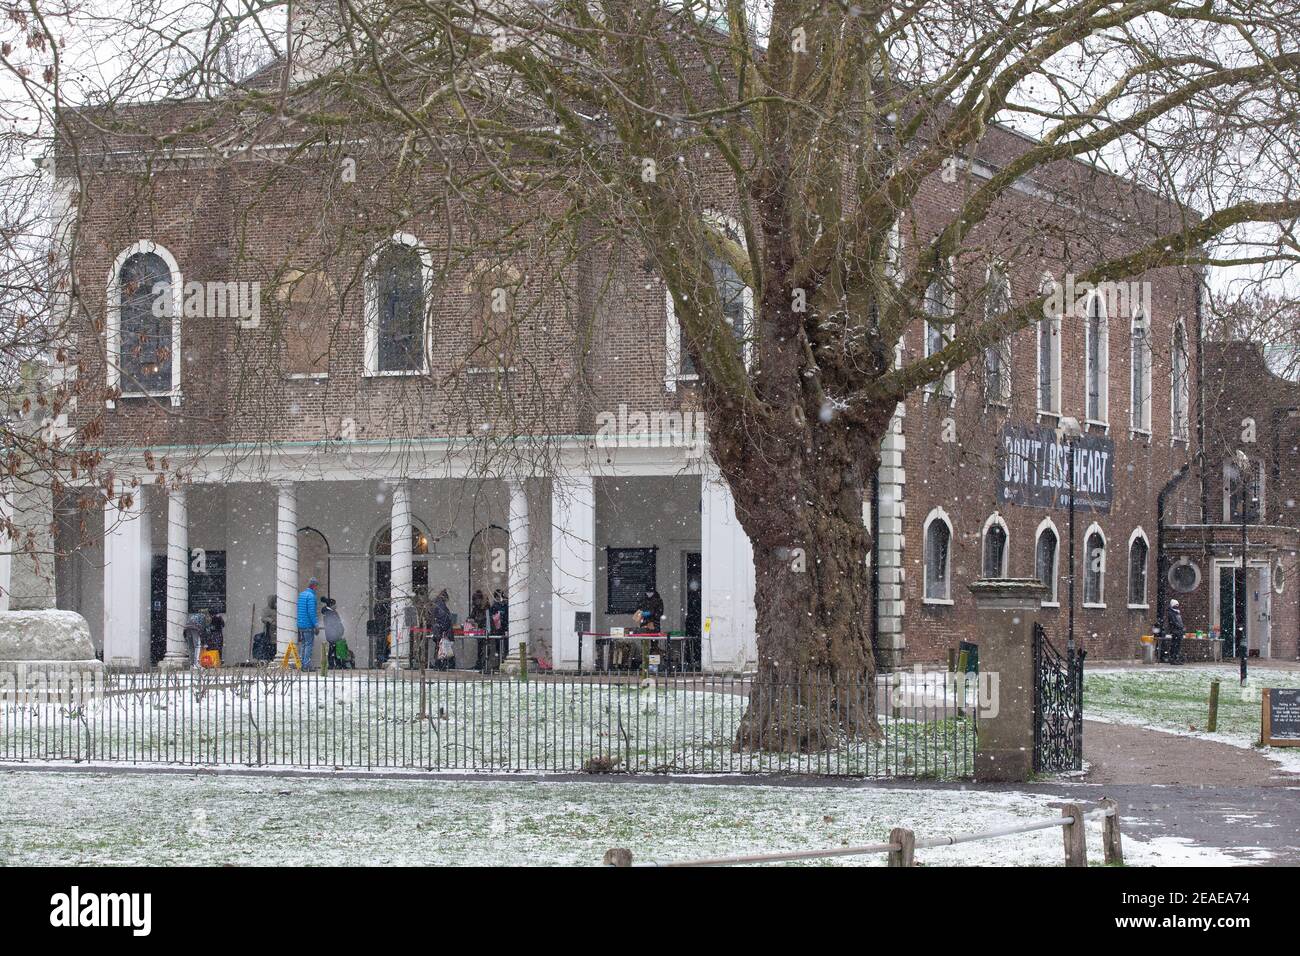 London, UK. 9th Feb, 2021. At Holy Trinity church on Clapham Common a food bank runs an outdoor collection service and hot drinks under a banner saying 'Don't lose heart.' After three days of snow in London it is starting to settle and winds have dropped as Storm Darcy has passed. Credit: Anna Watson/Alamy Live News Stock Photo